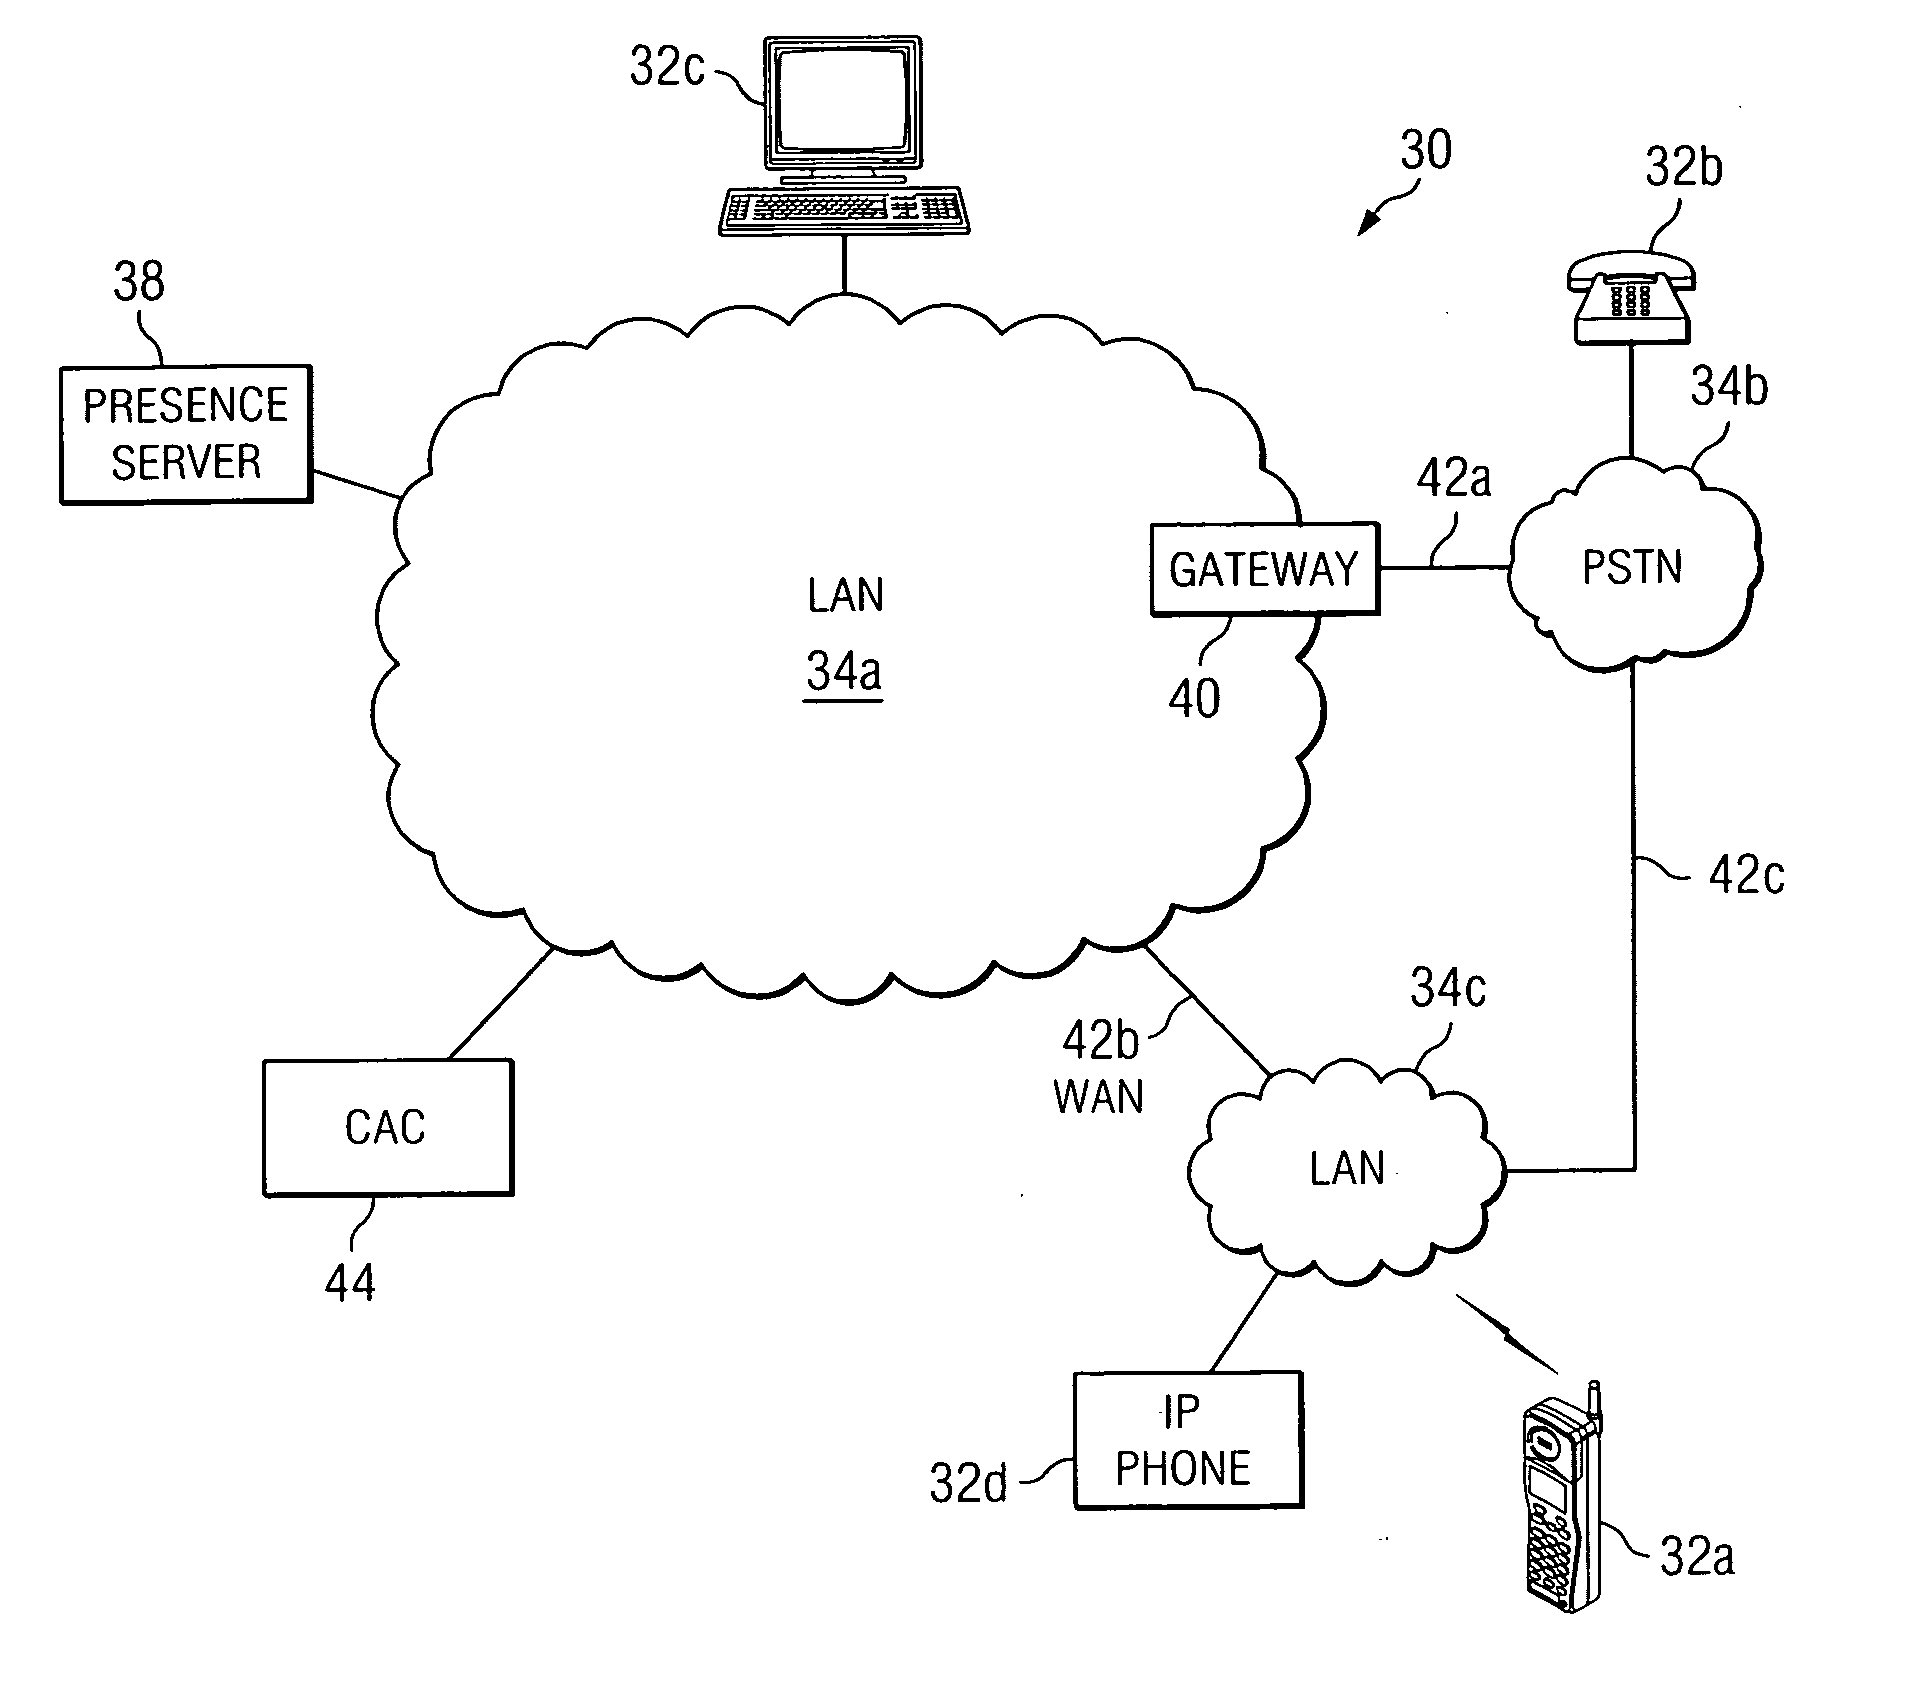 Method and system indicating a level of security for VoIP calls through presence